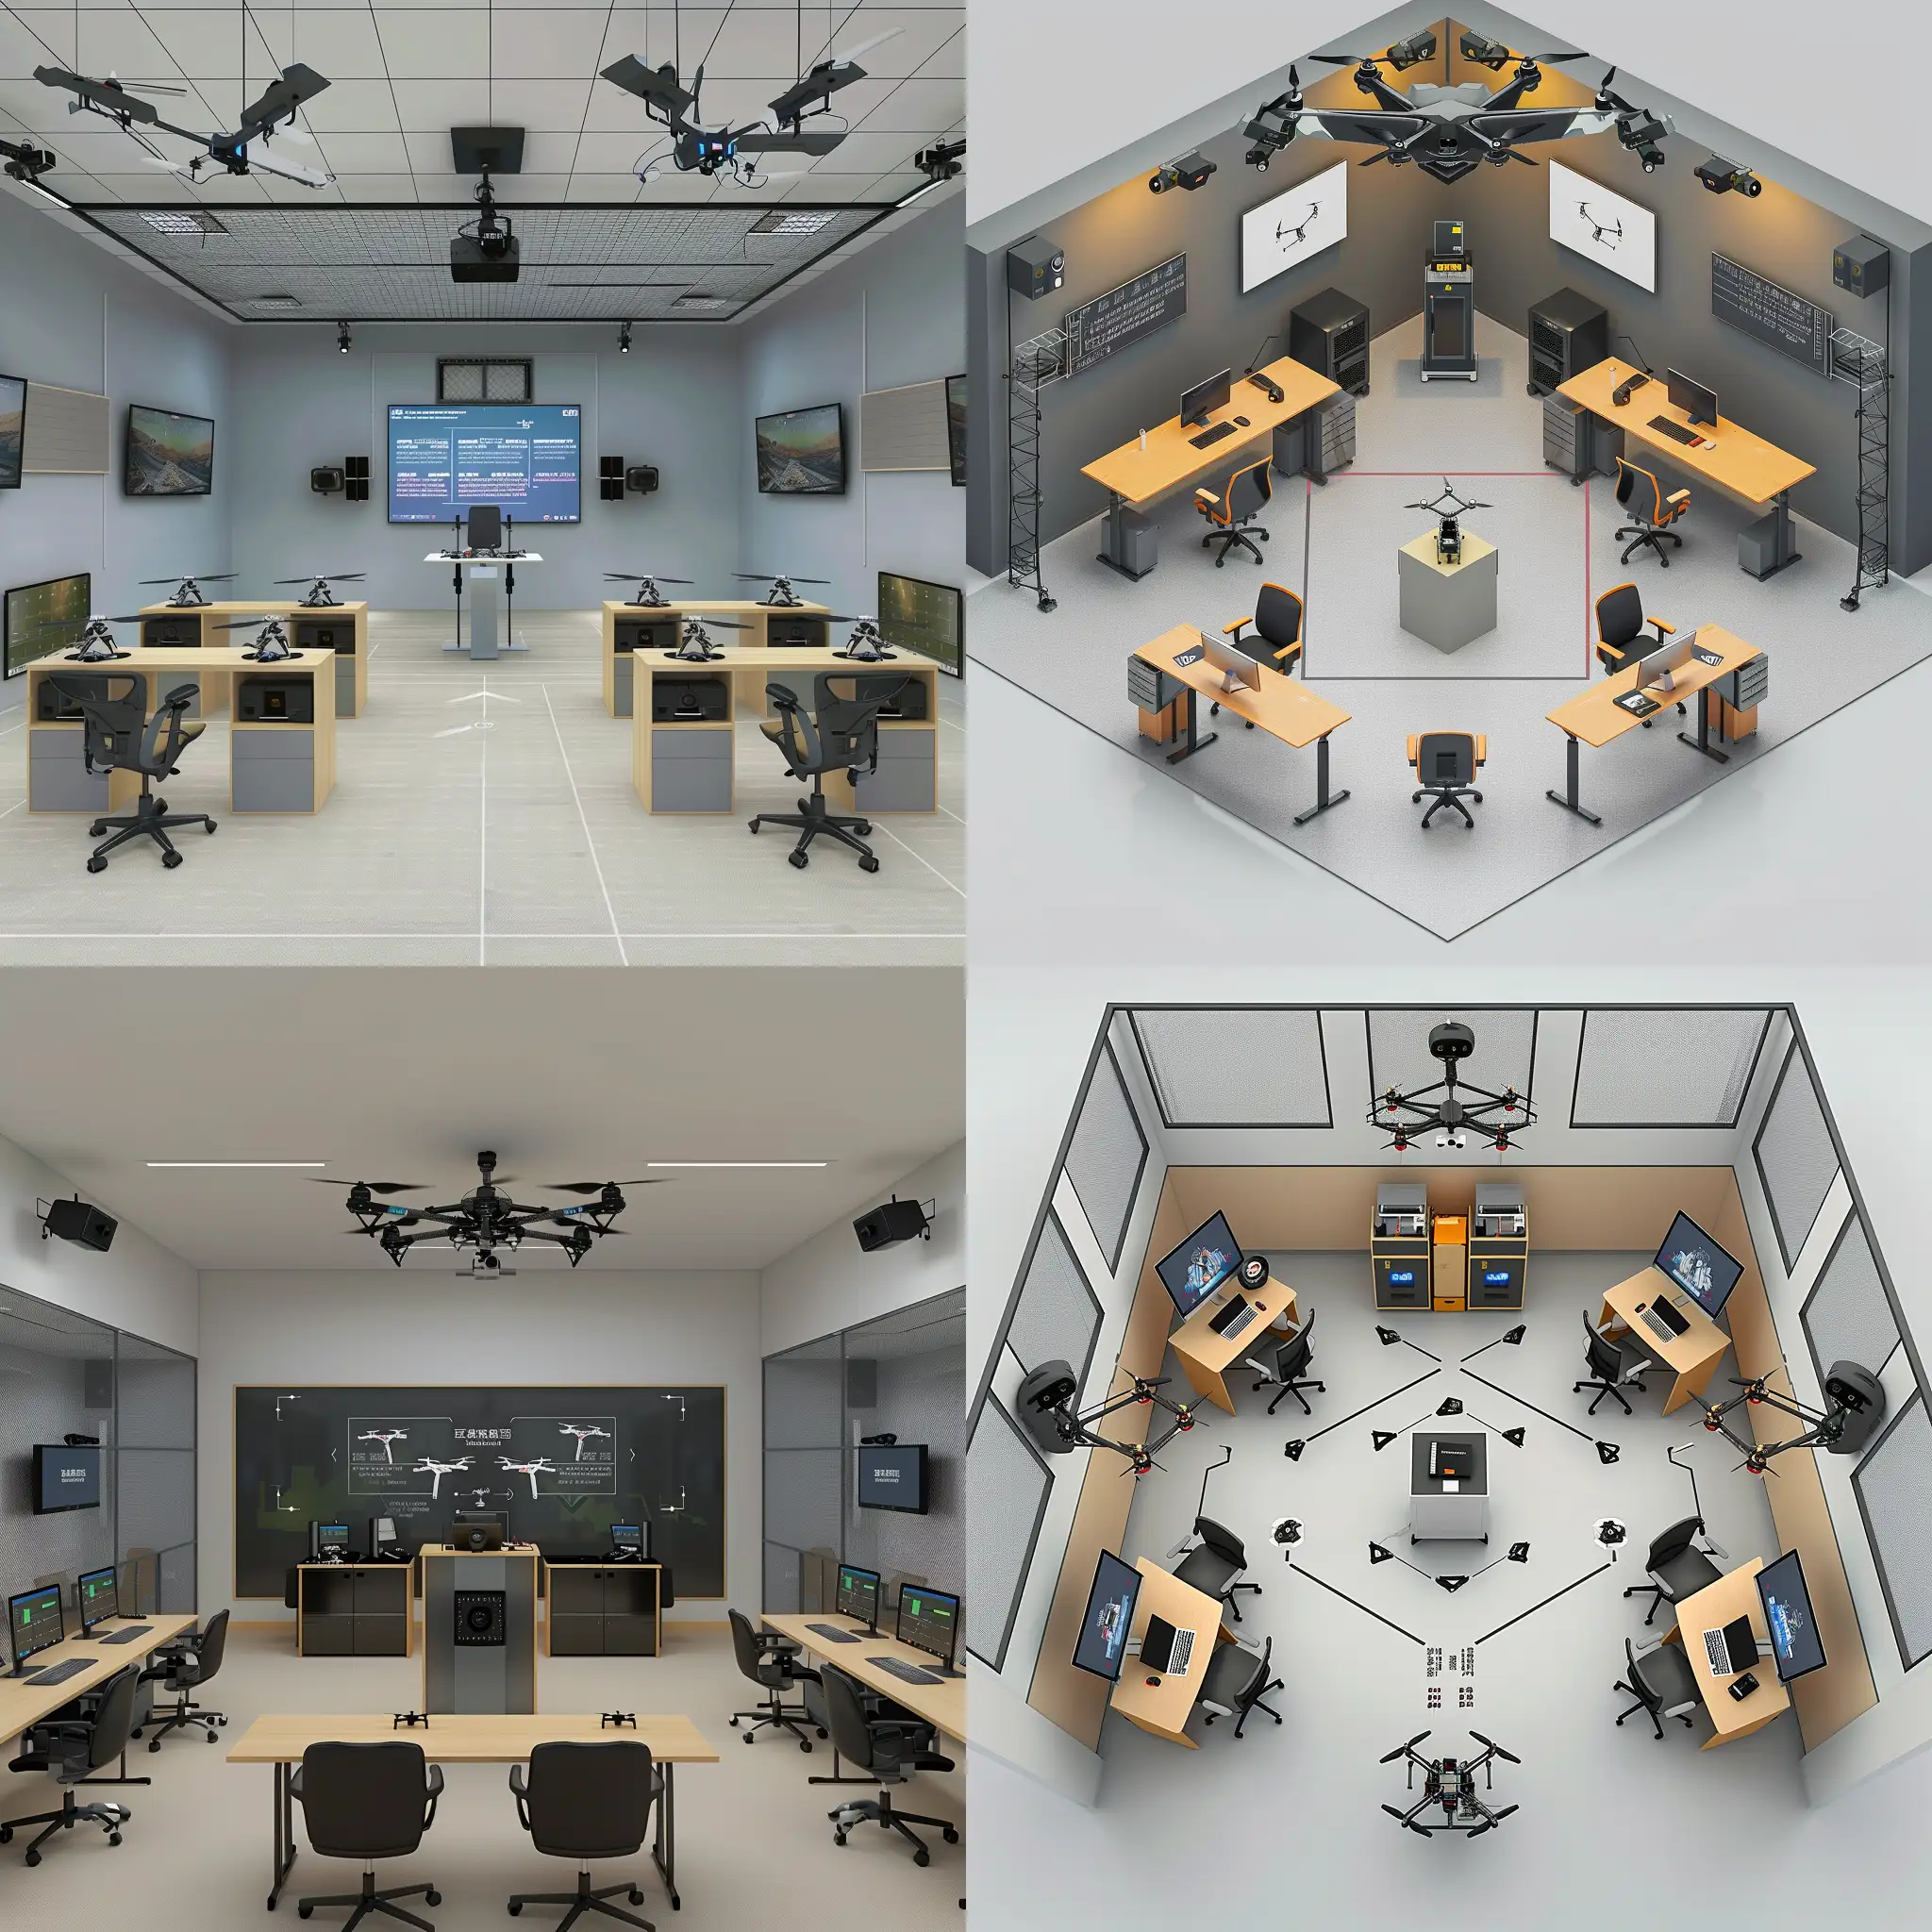 Intelligent-Unmanned-Cluster-Training-Room-with-Drone-Simulation-Setup